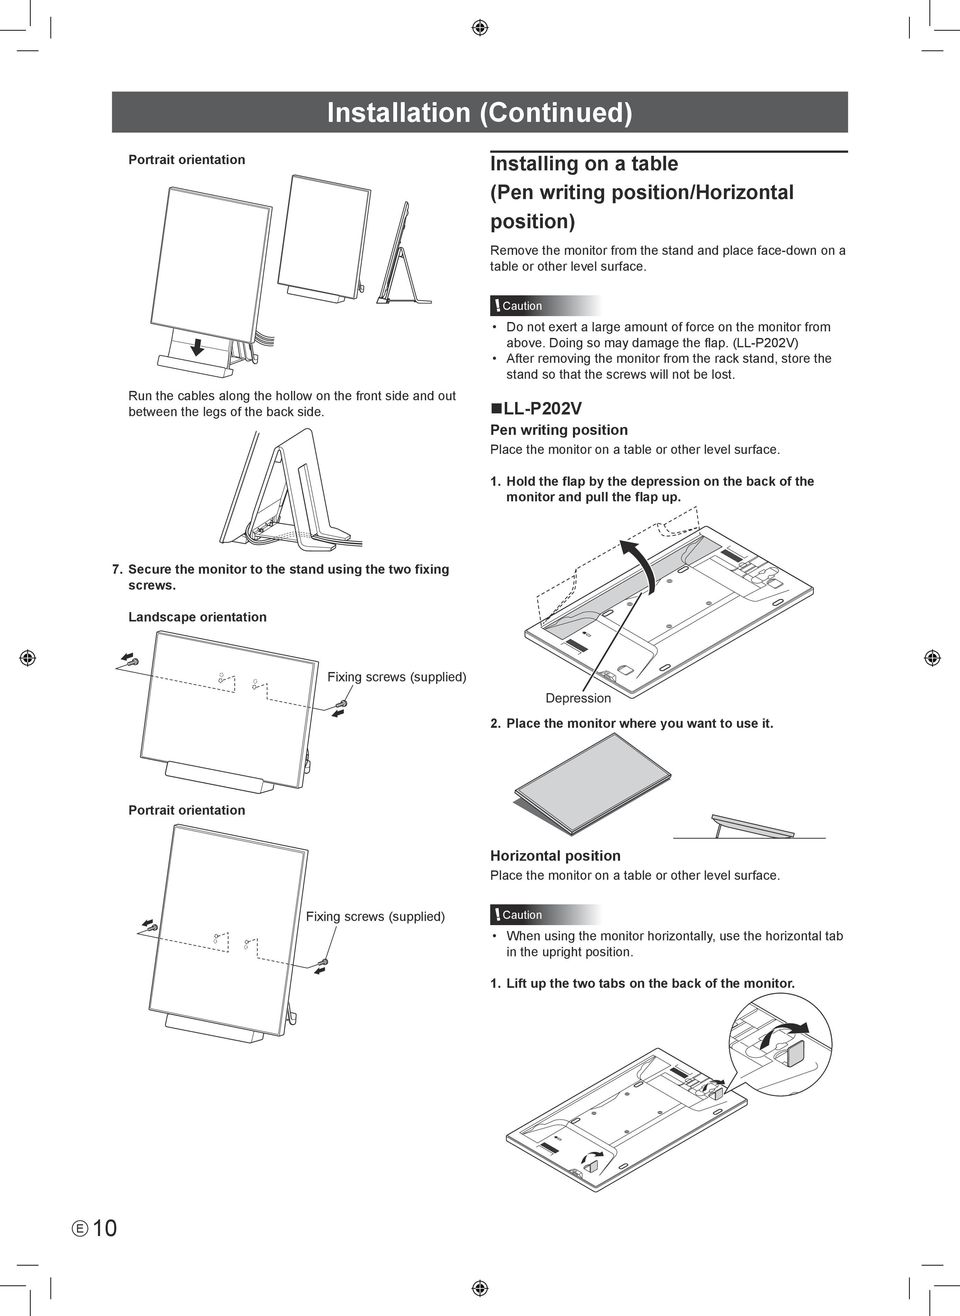 (LL-P202V) After removing the monitor from the rack stand, store the stand so that the screws will not be lost. LL-P202V Pen writing position Place the monitor on a table or other level surface. 1.